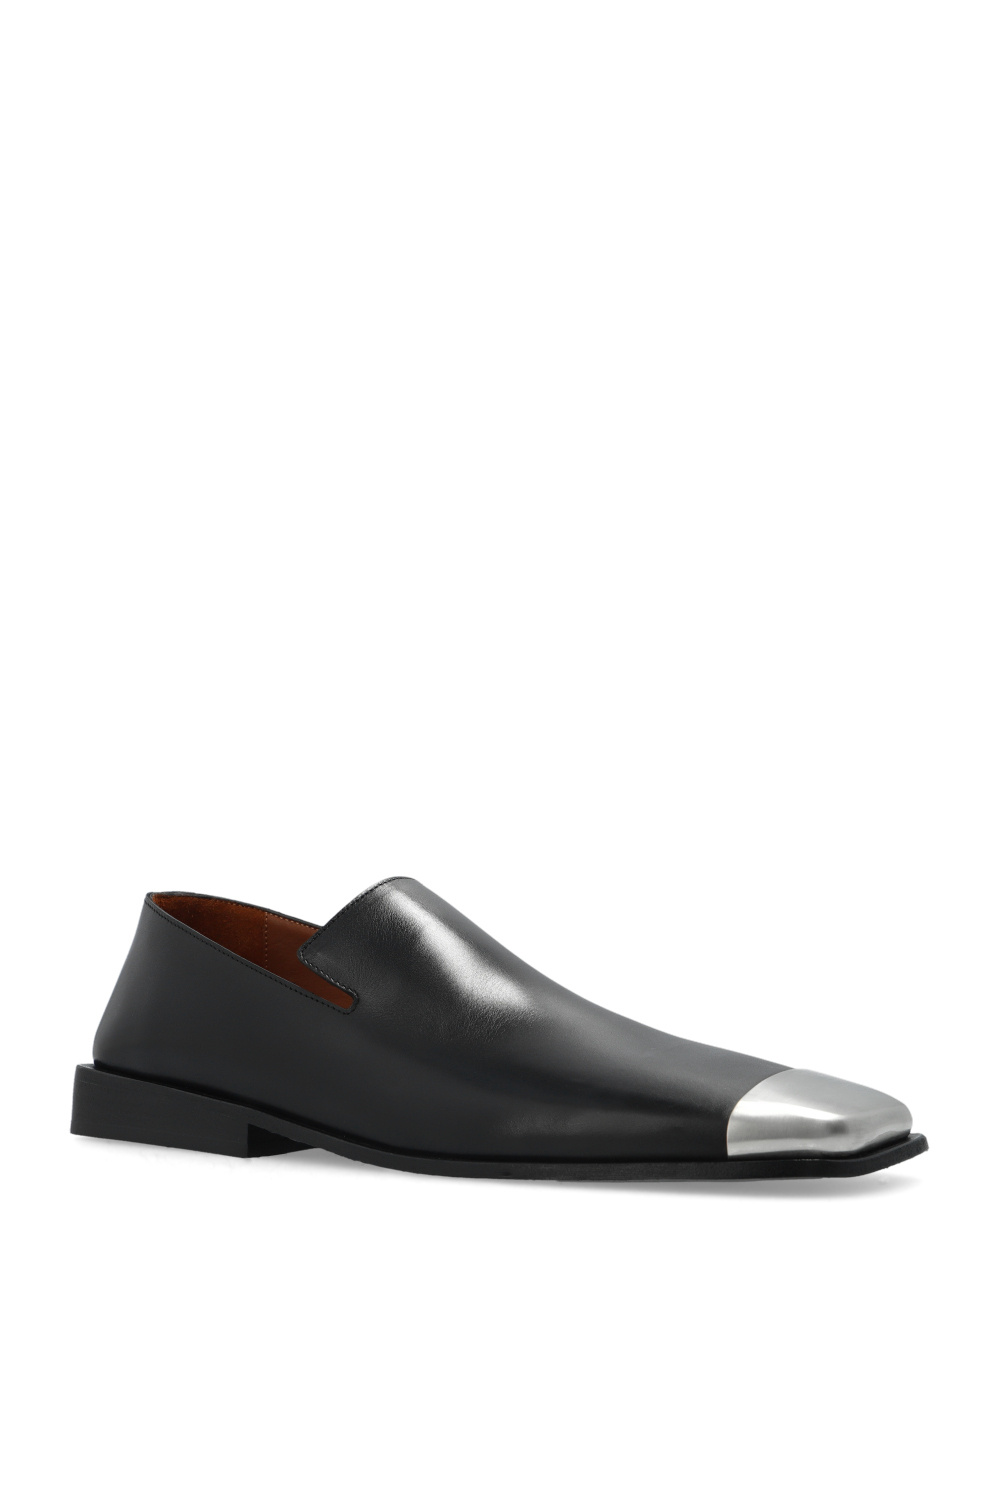 Marsell 'Lamiera’ leather loafers